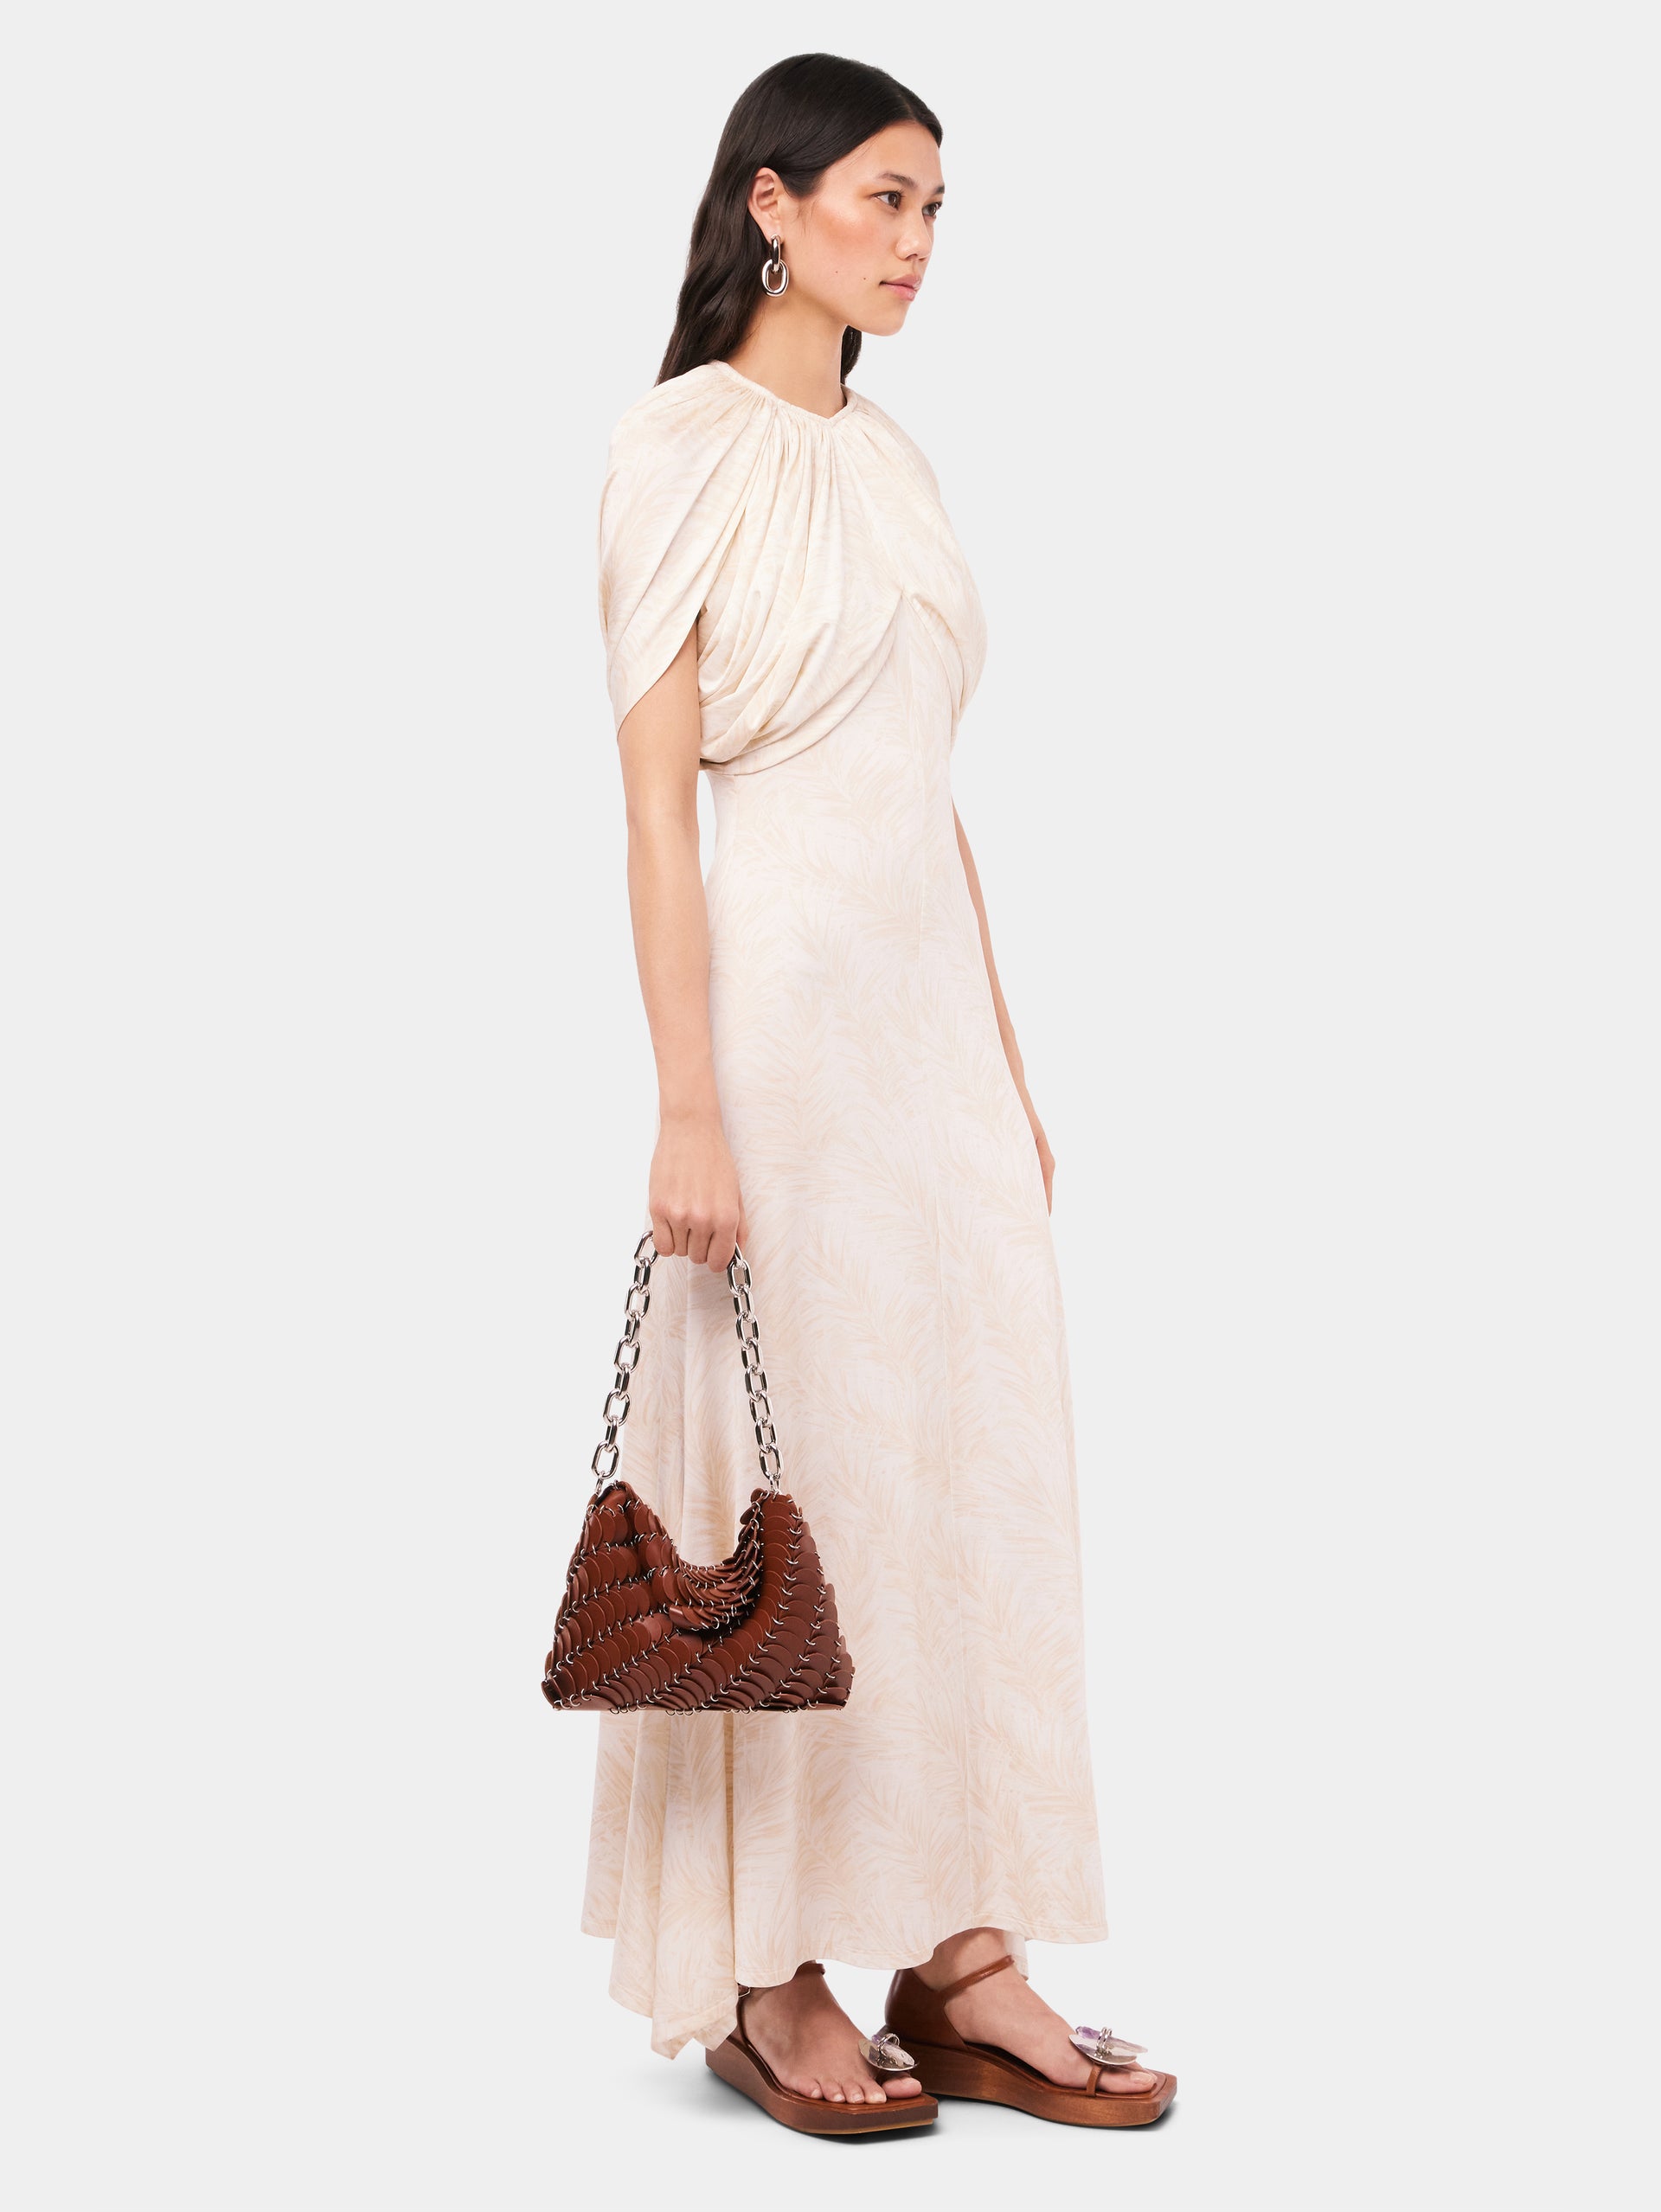 Long ecru dress with feather prints and draping details